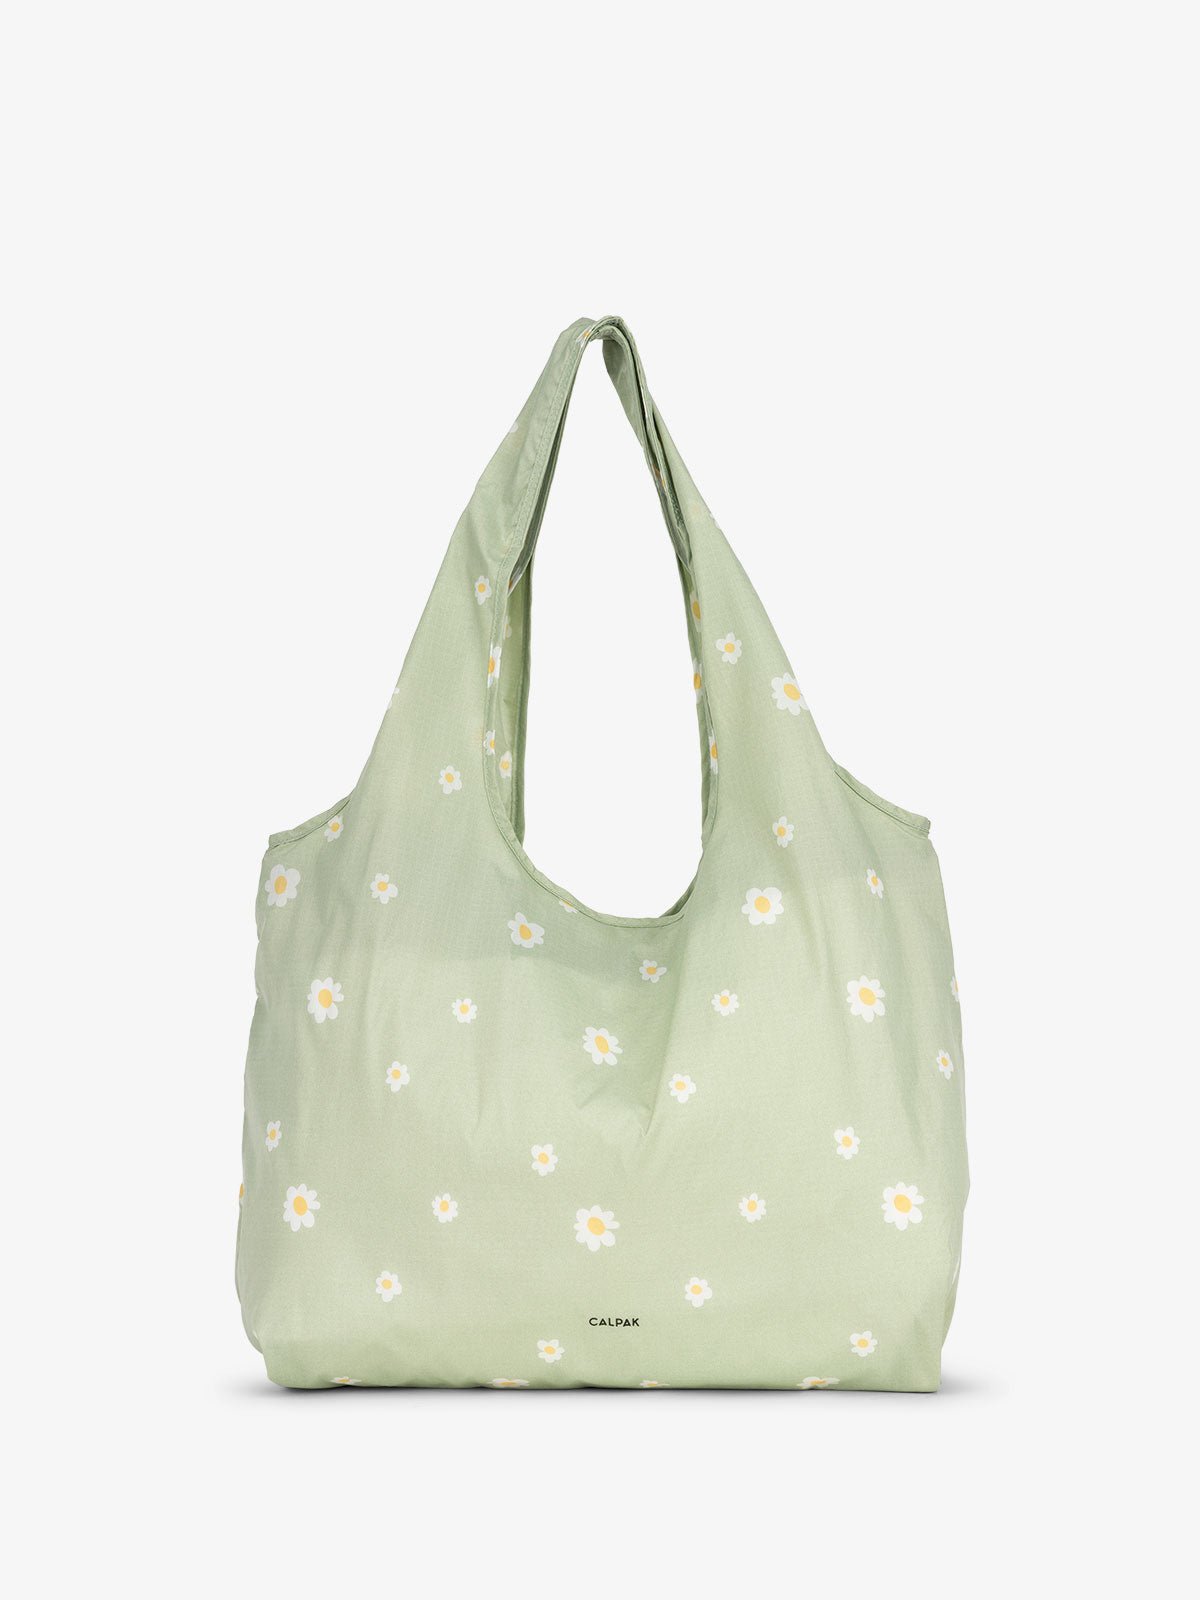 Packable tote bag with floral print